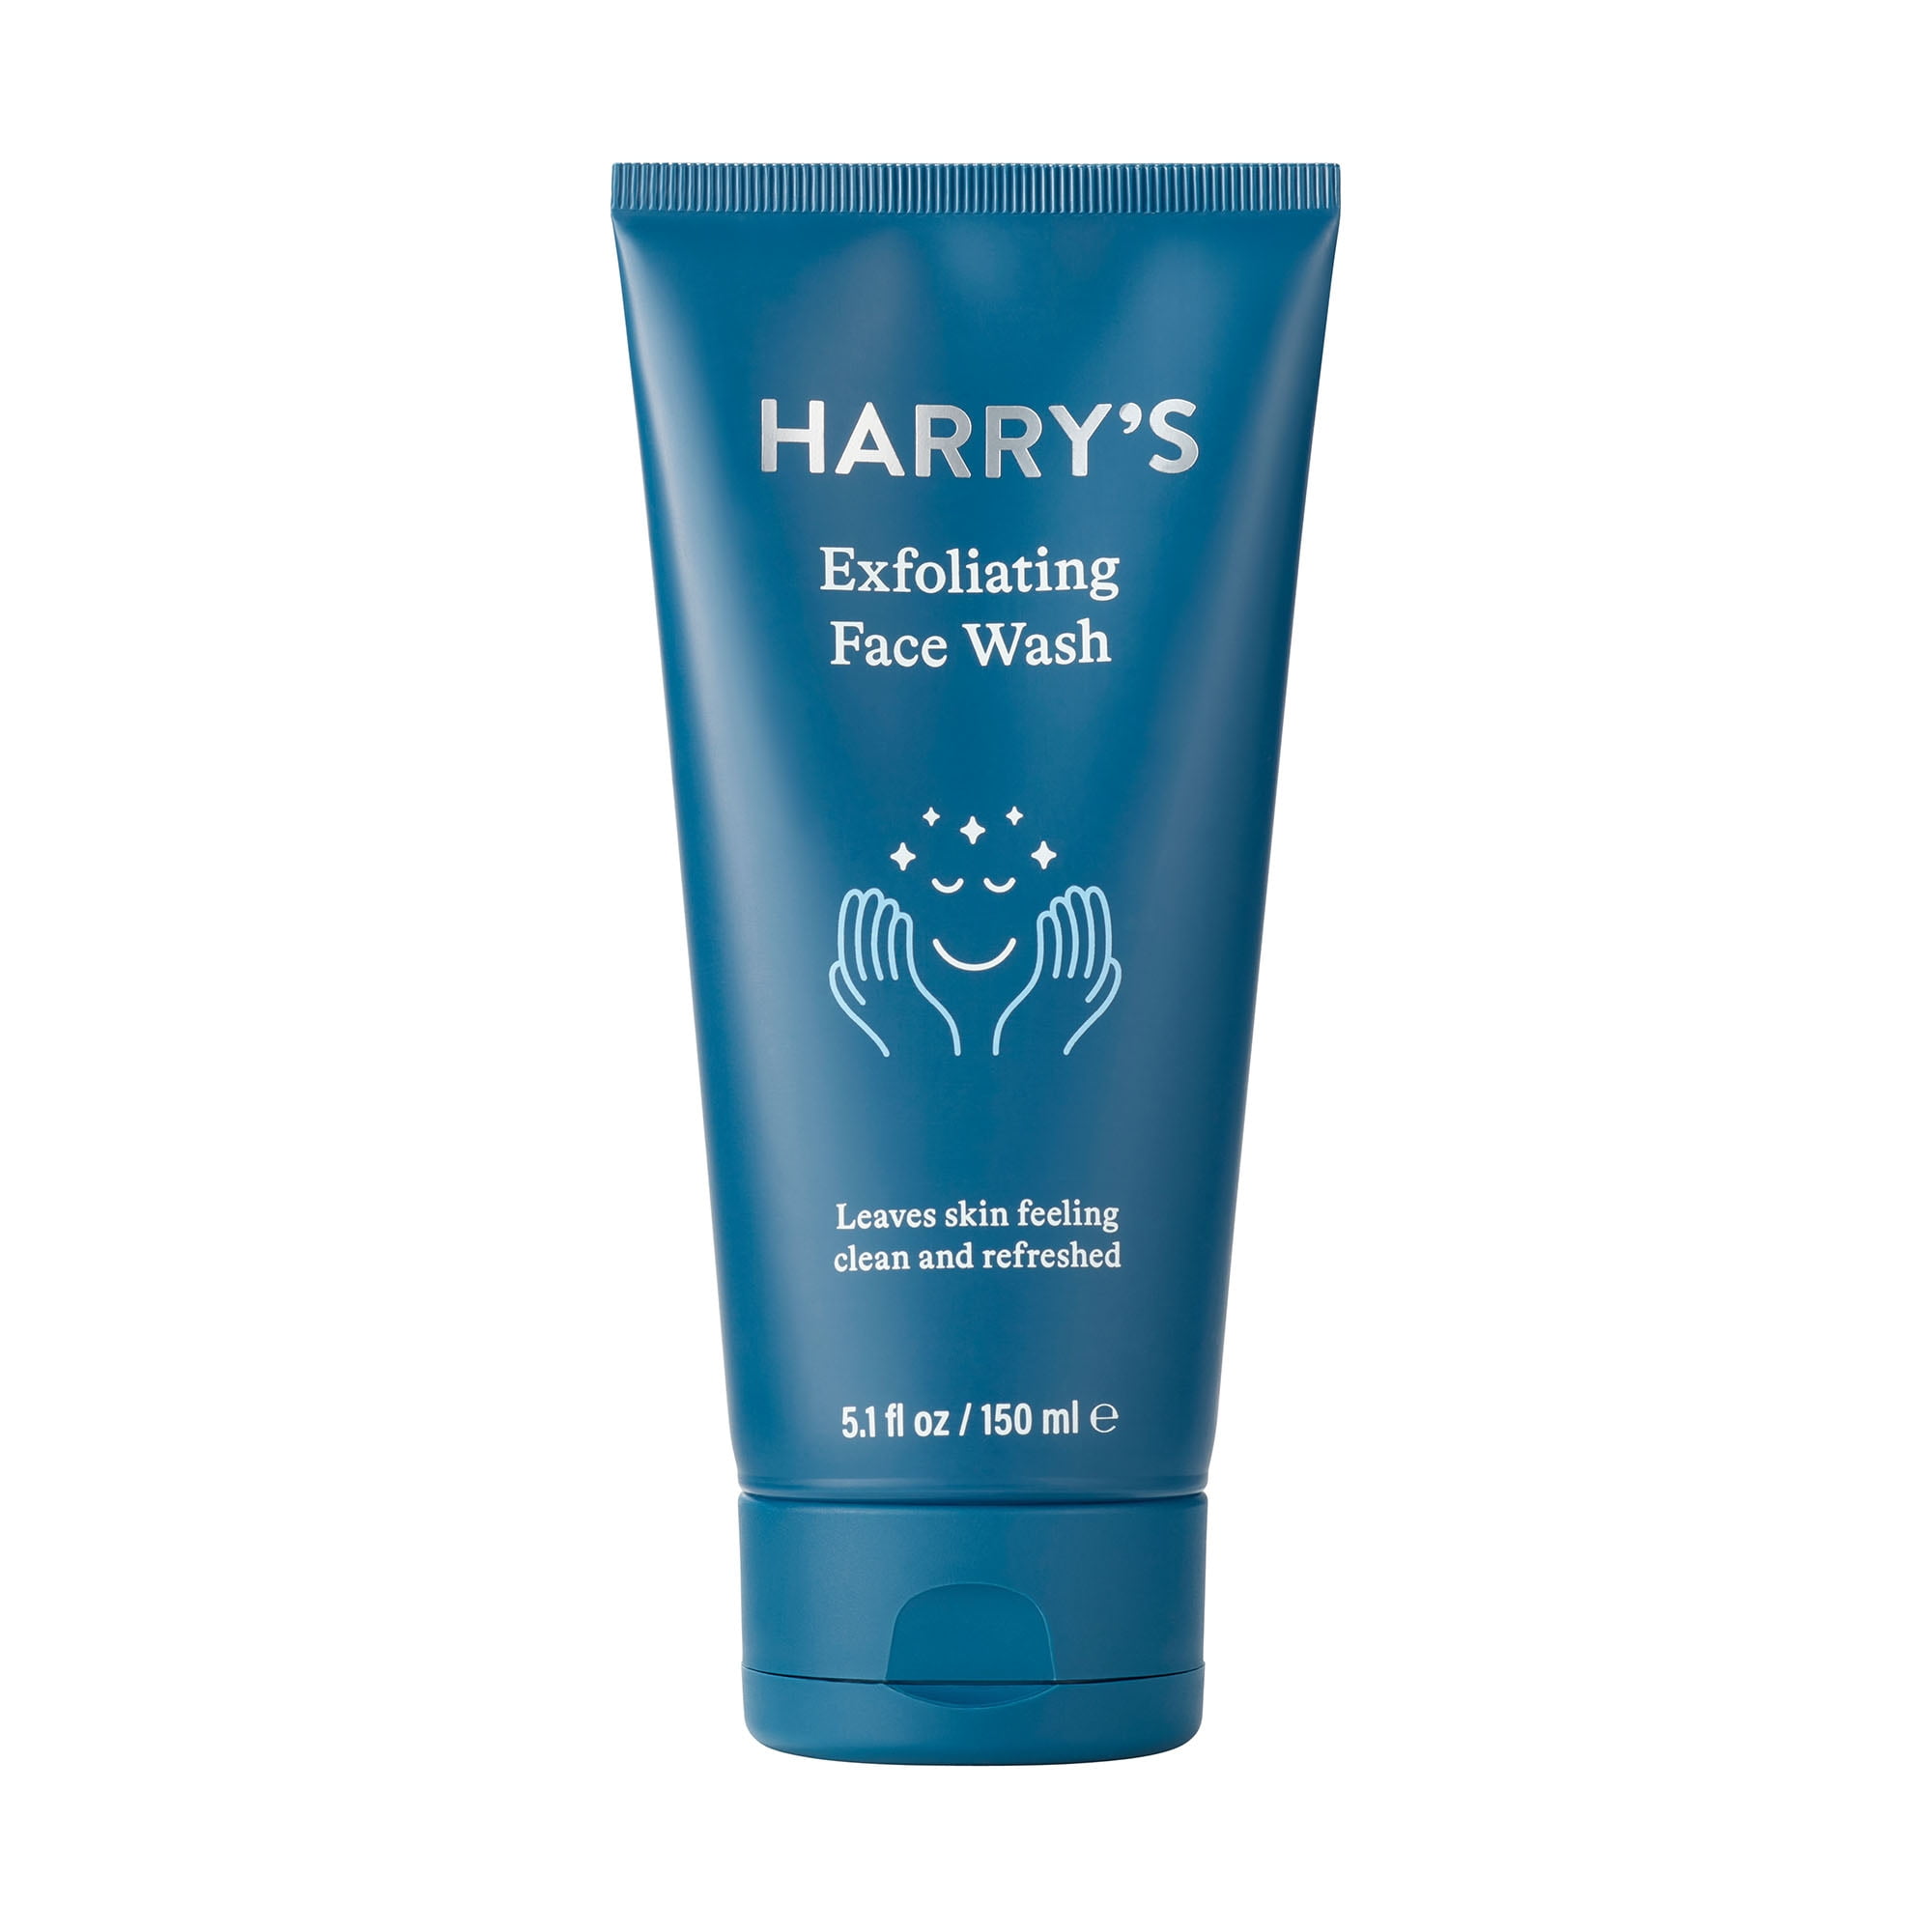 Harry's Men's Exfoliating Face Wash with Peppermint and Eucalyptus, 5.1 fl oz